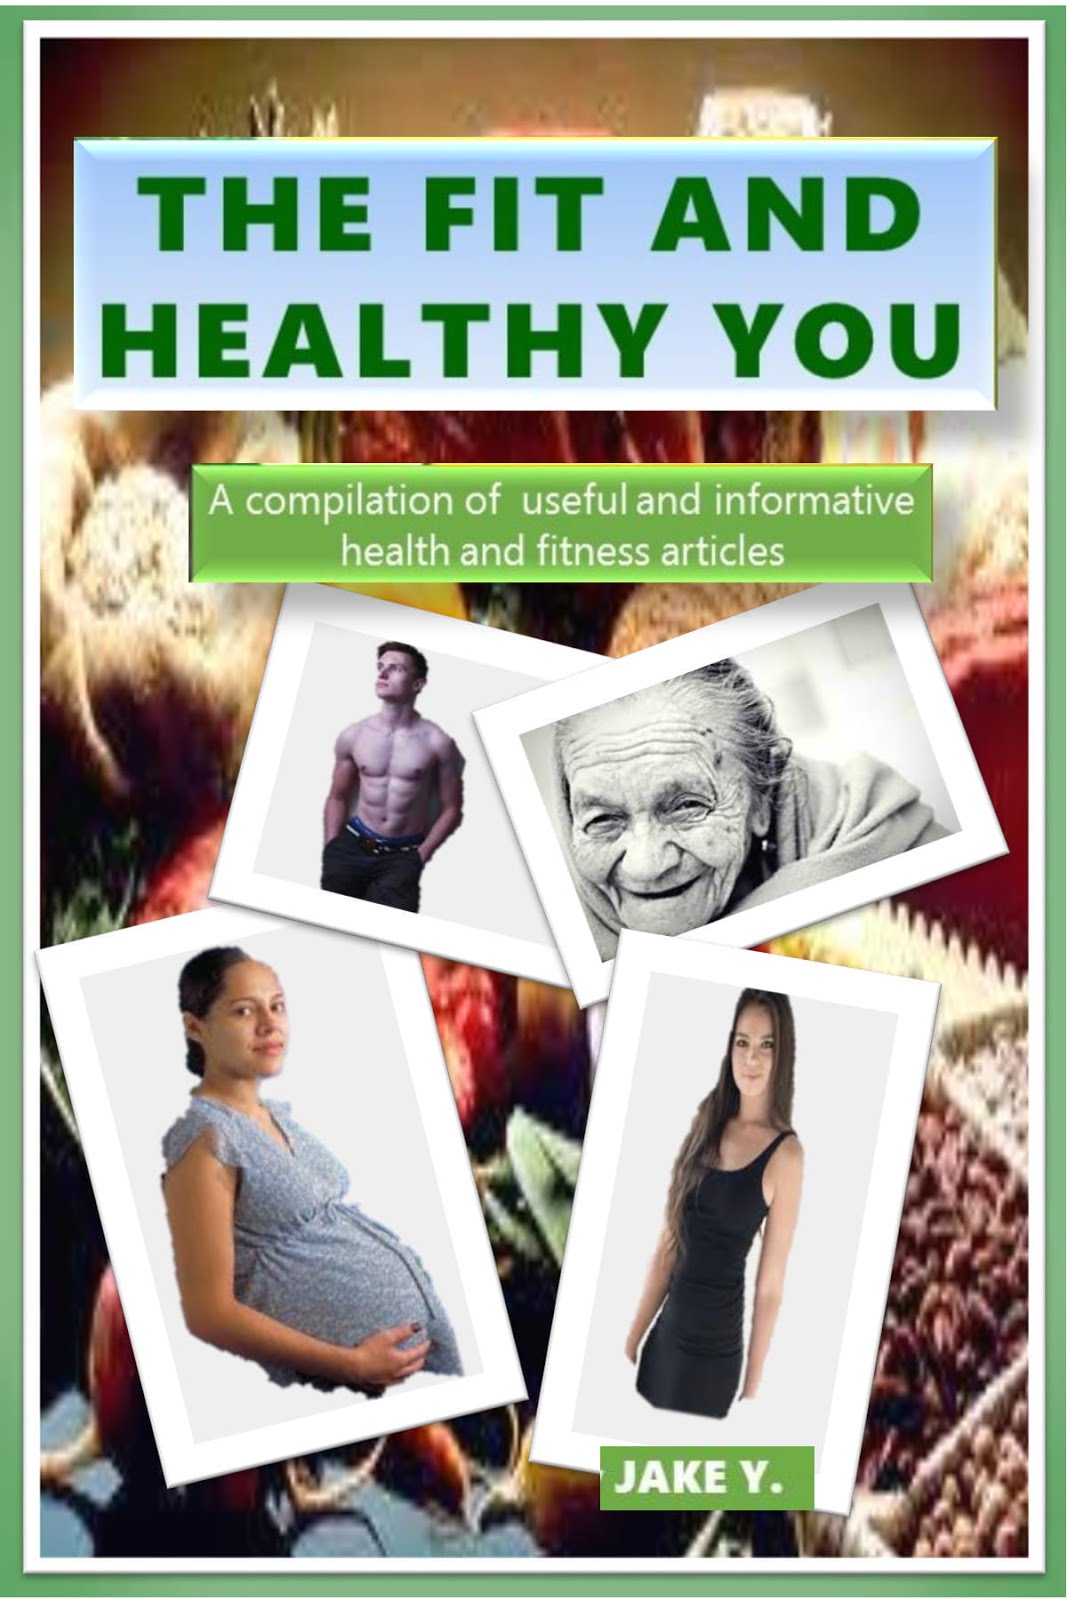 The Fit and Healthy You eBook